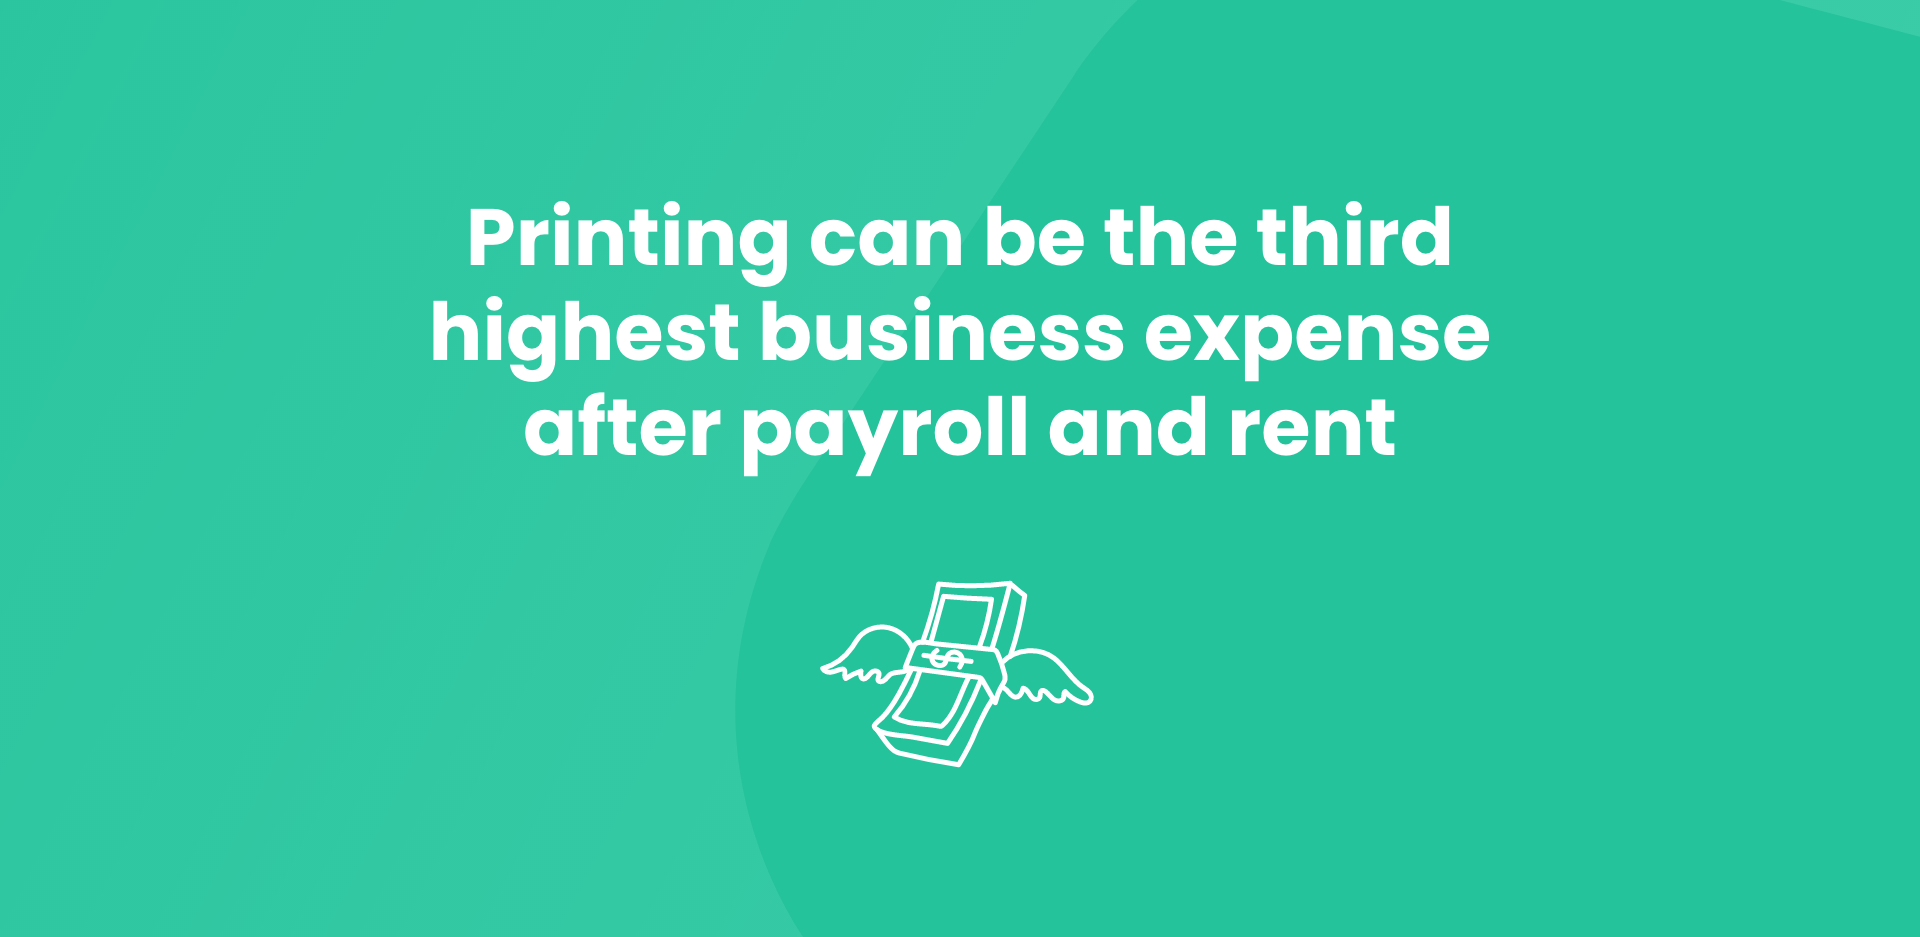 Printing can be the third highest expense after payroll and rent